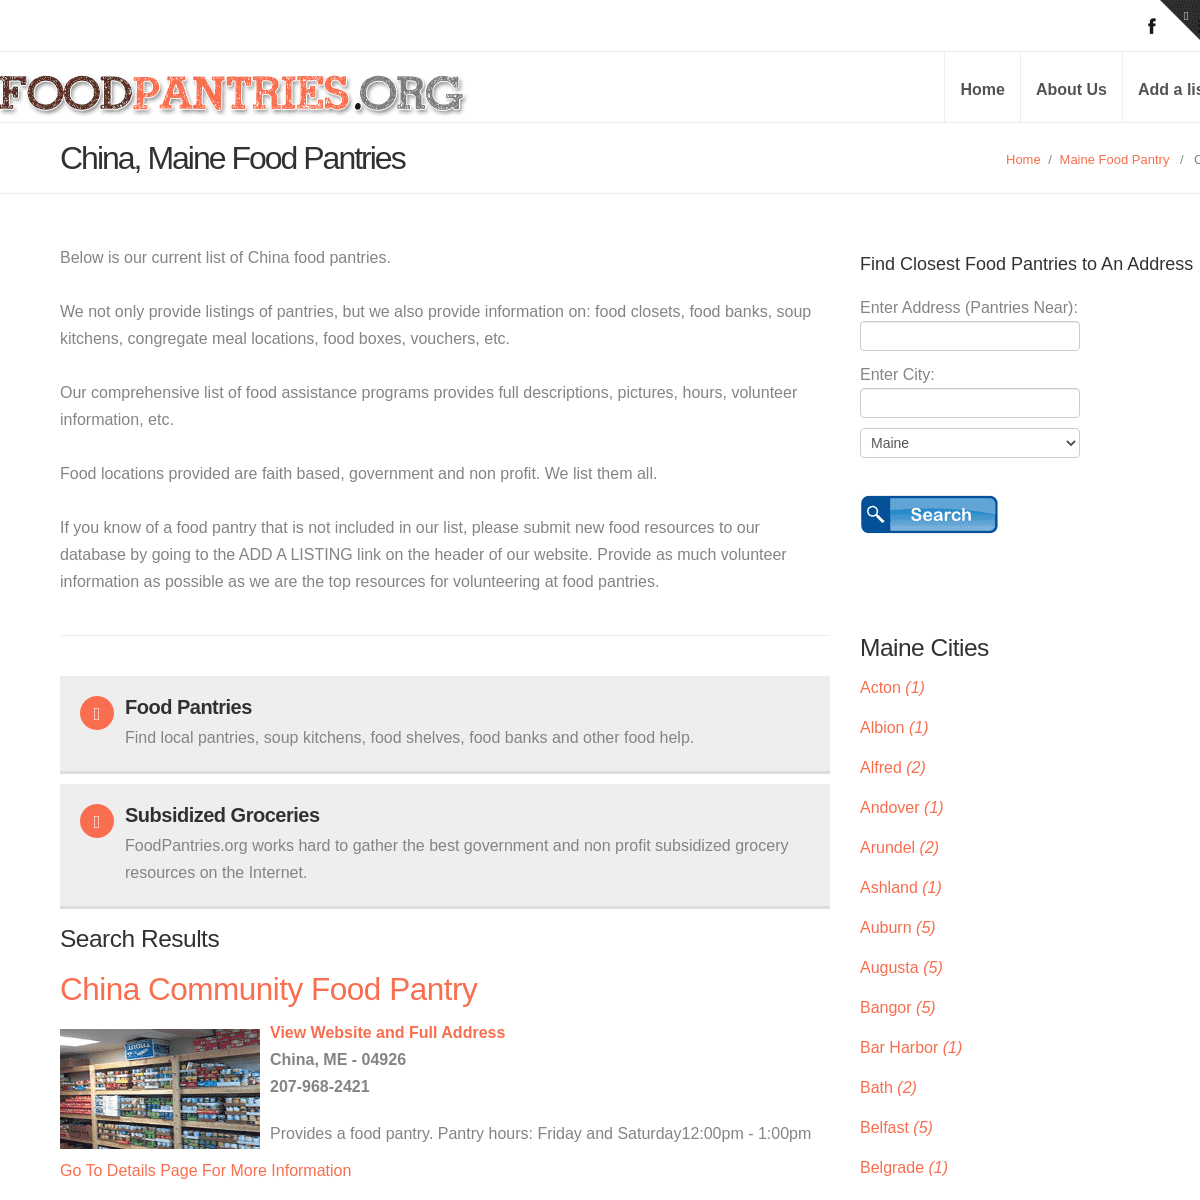 A complete backup of https://foodpantries.org/ci/me-china